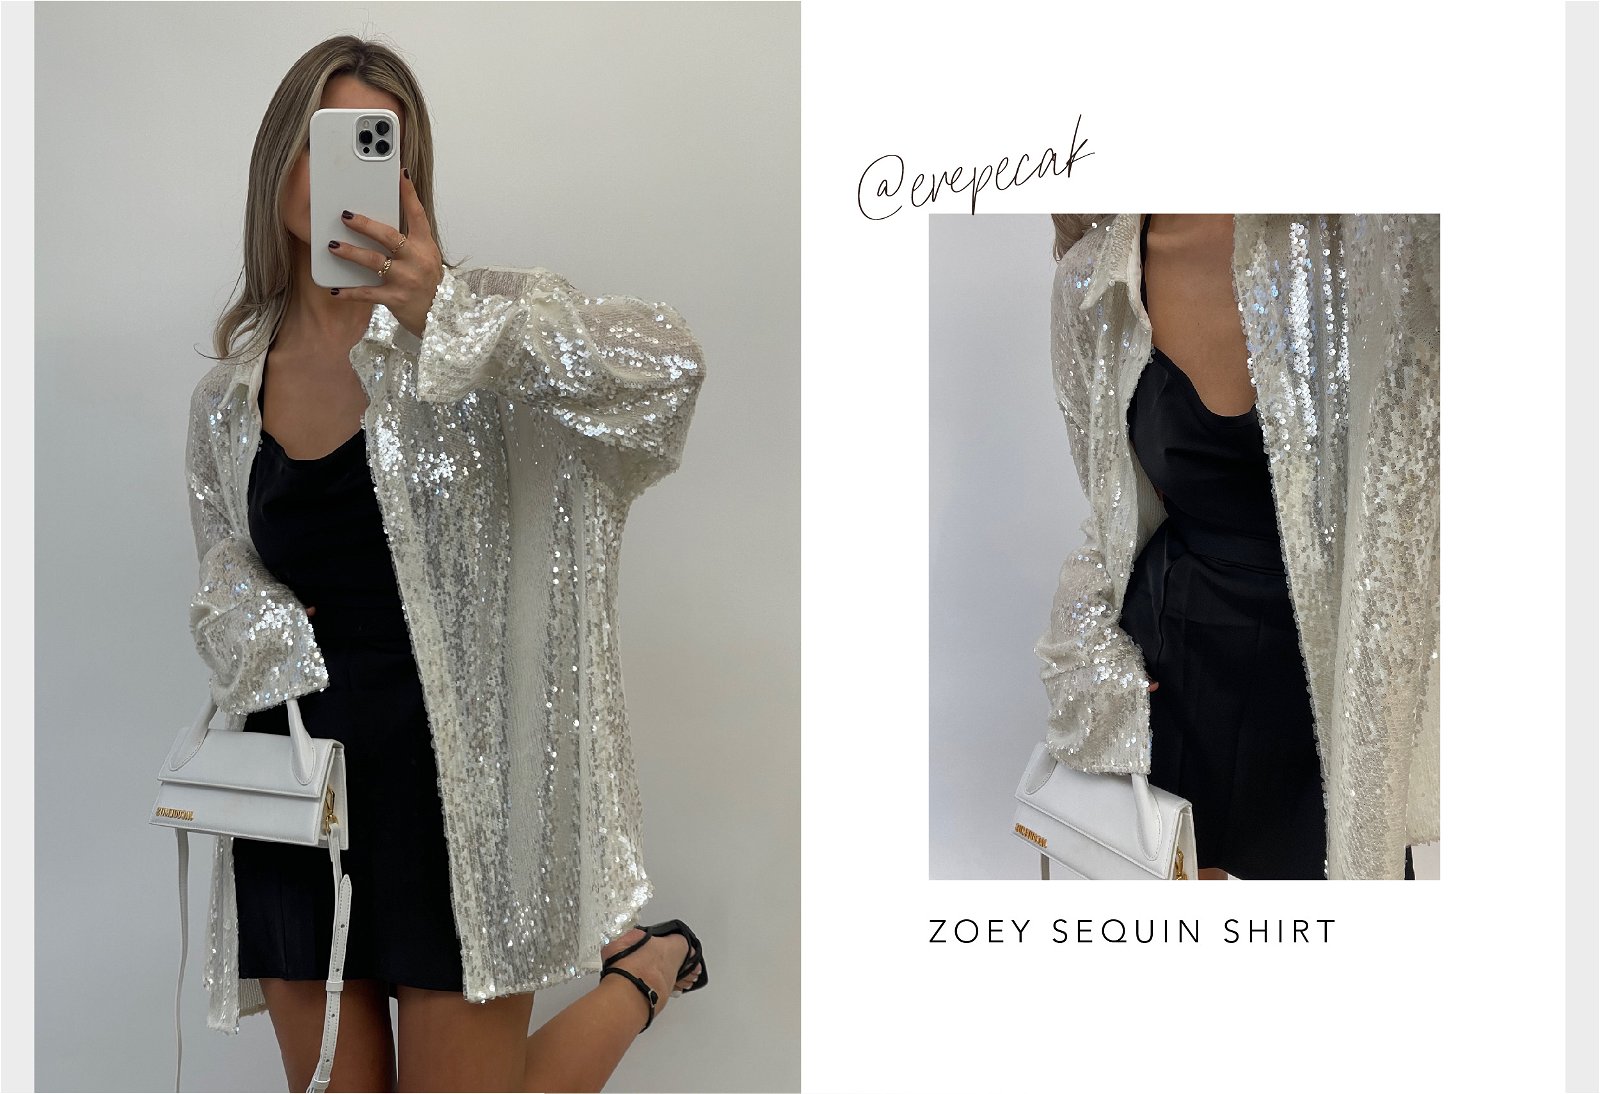 4th & Reckless Zoey Sequin Shirt – greens are good for you